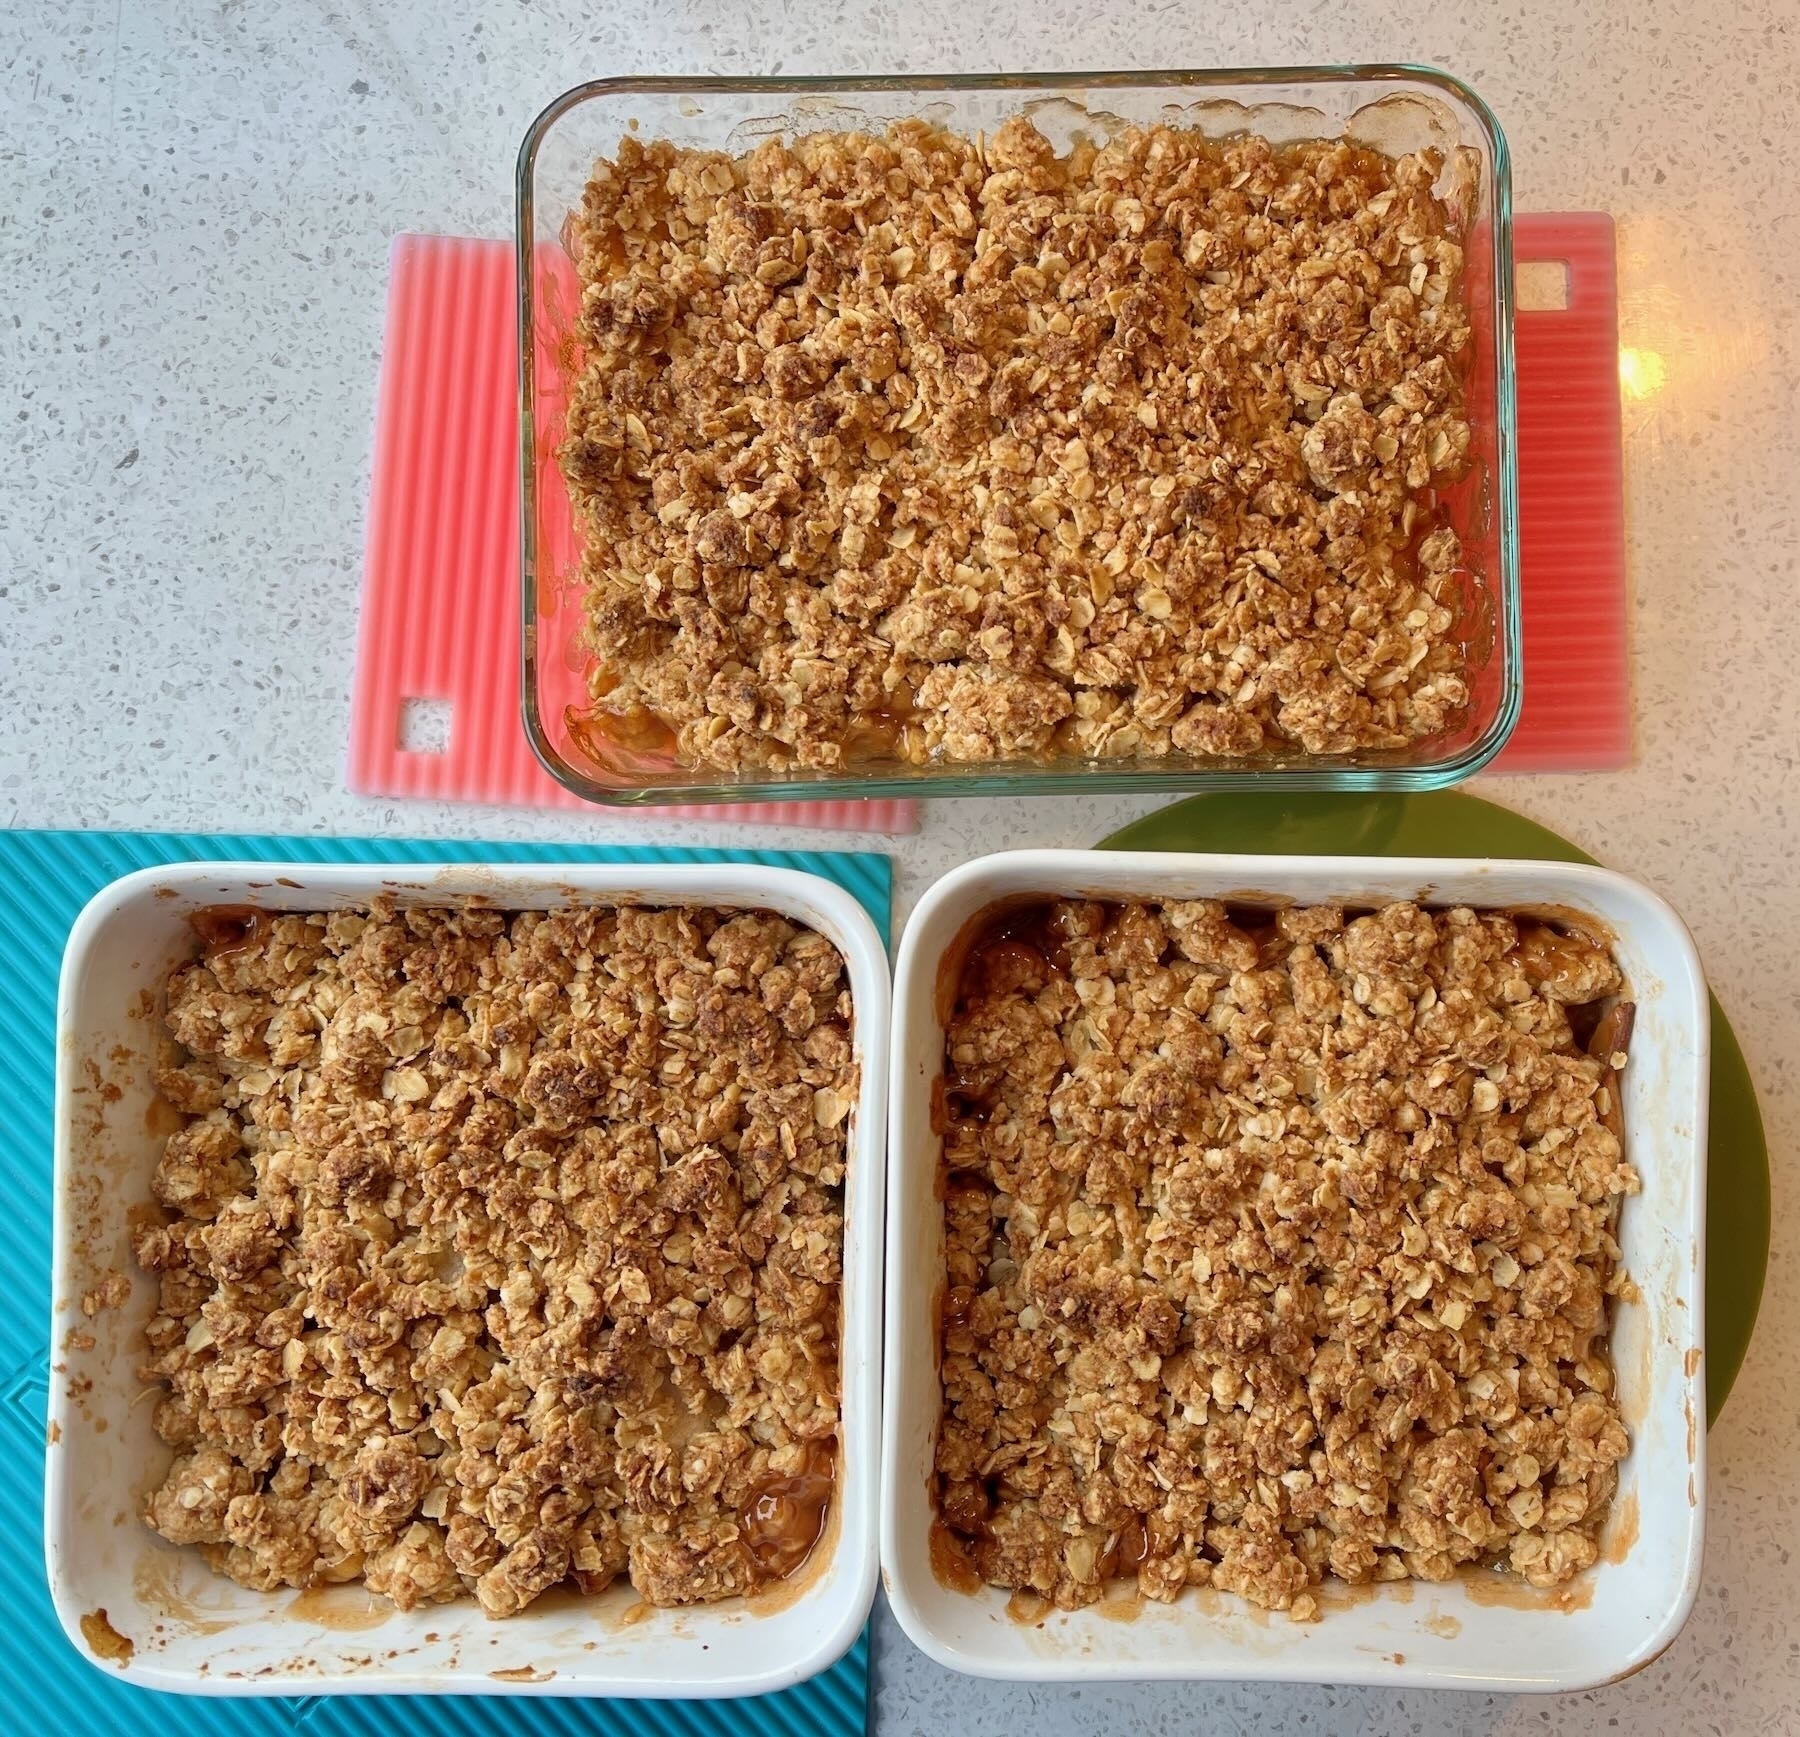 3 dishes of cooked Apple Crisp (taken from directly above). 